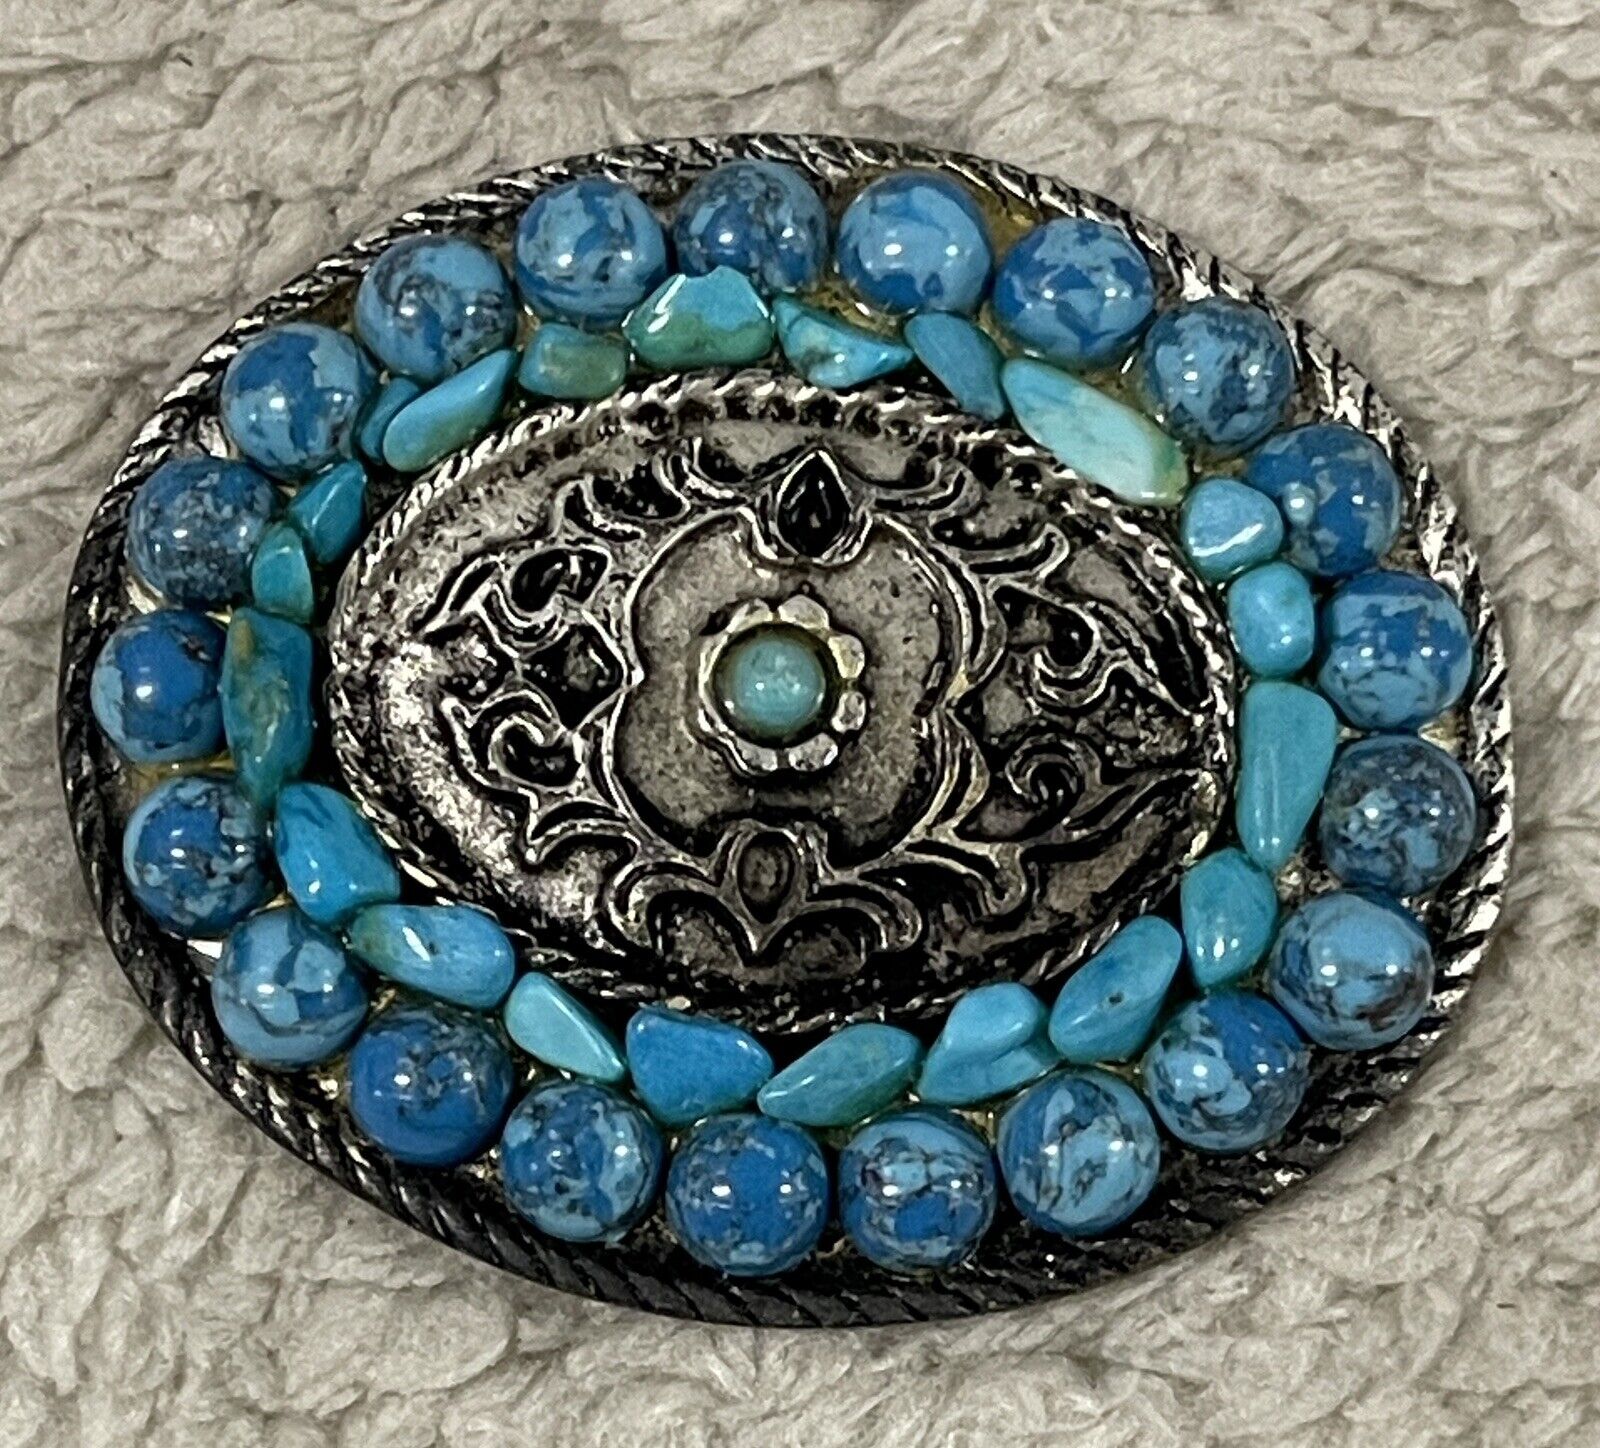 Turquoise Blue Beads Beaded Western Native American Belt Buckle